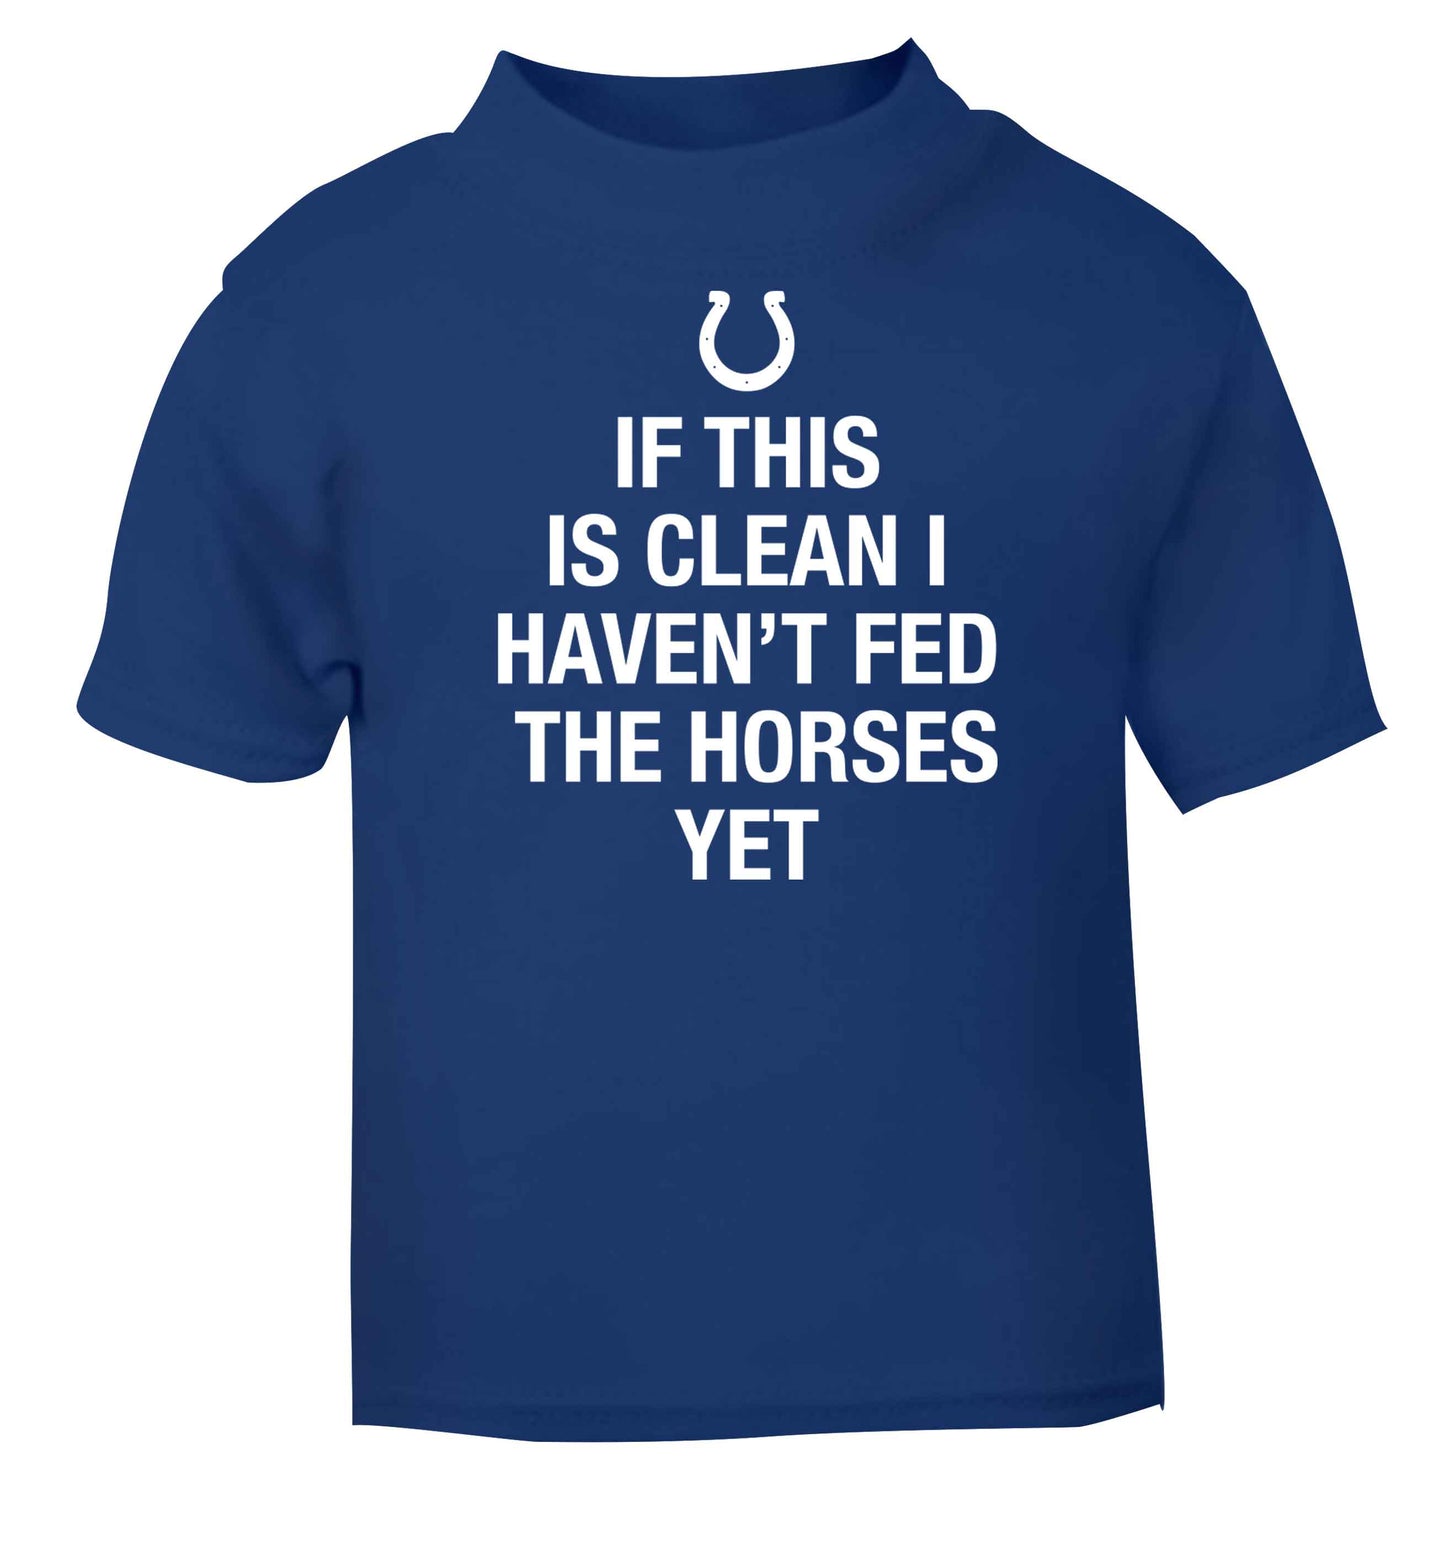 If this isn't clean I haven't fed the horses yet blue baby toddler Tshirt 2 Years